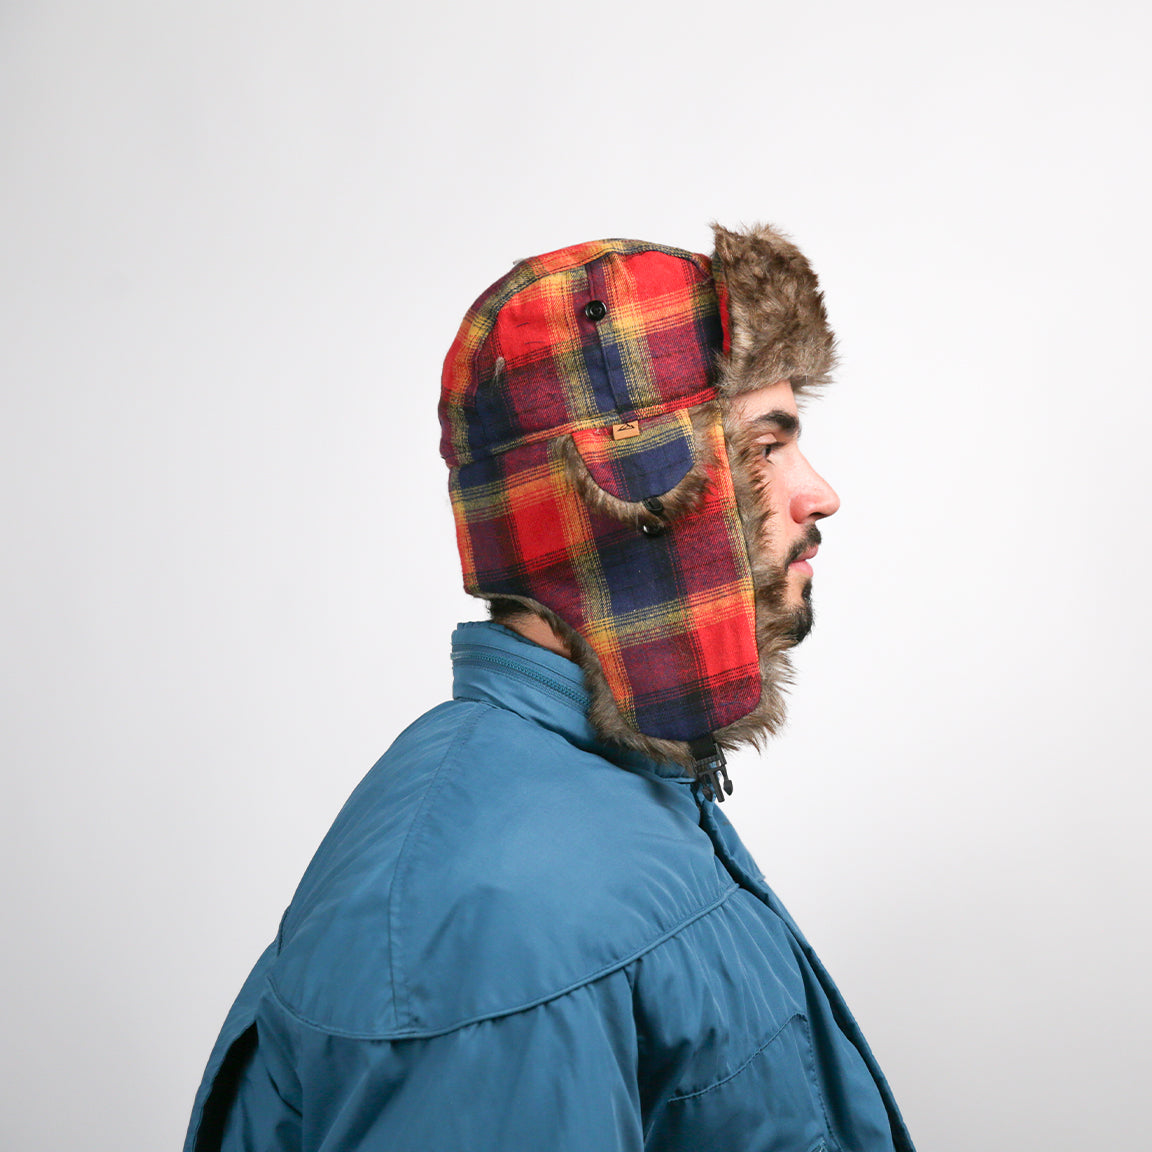 The person models an aviator hat featuring a vibrant red plaid pattern with a brown faux fur lining. The hat's design includes ear flaps and a chin strap for secure and adjustable fitting.